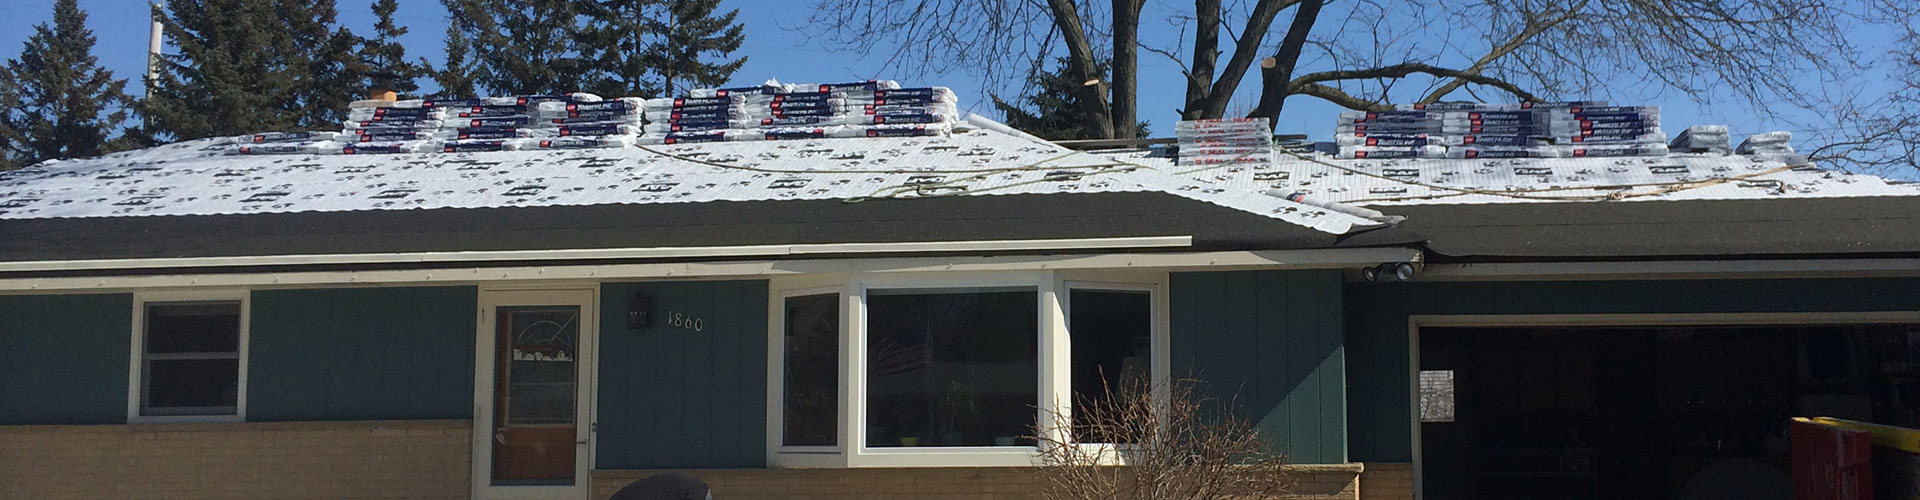 Winter re-roofing project